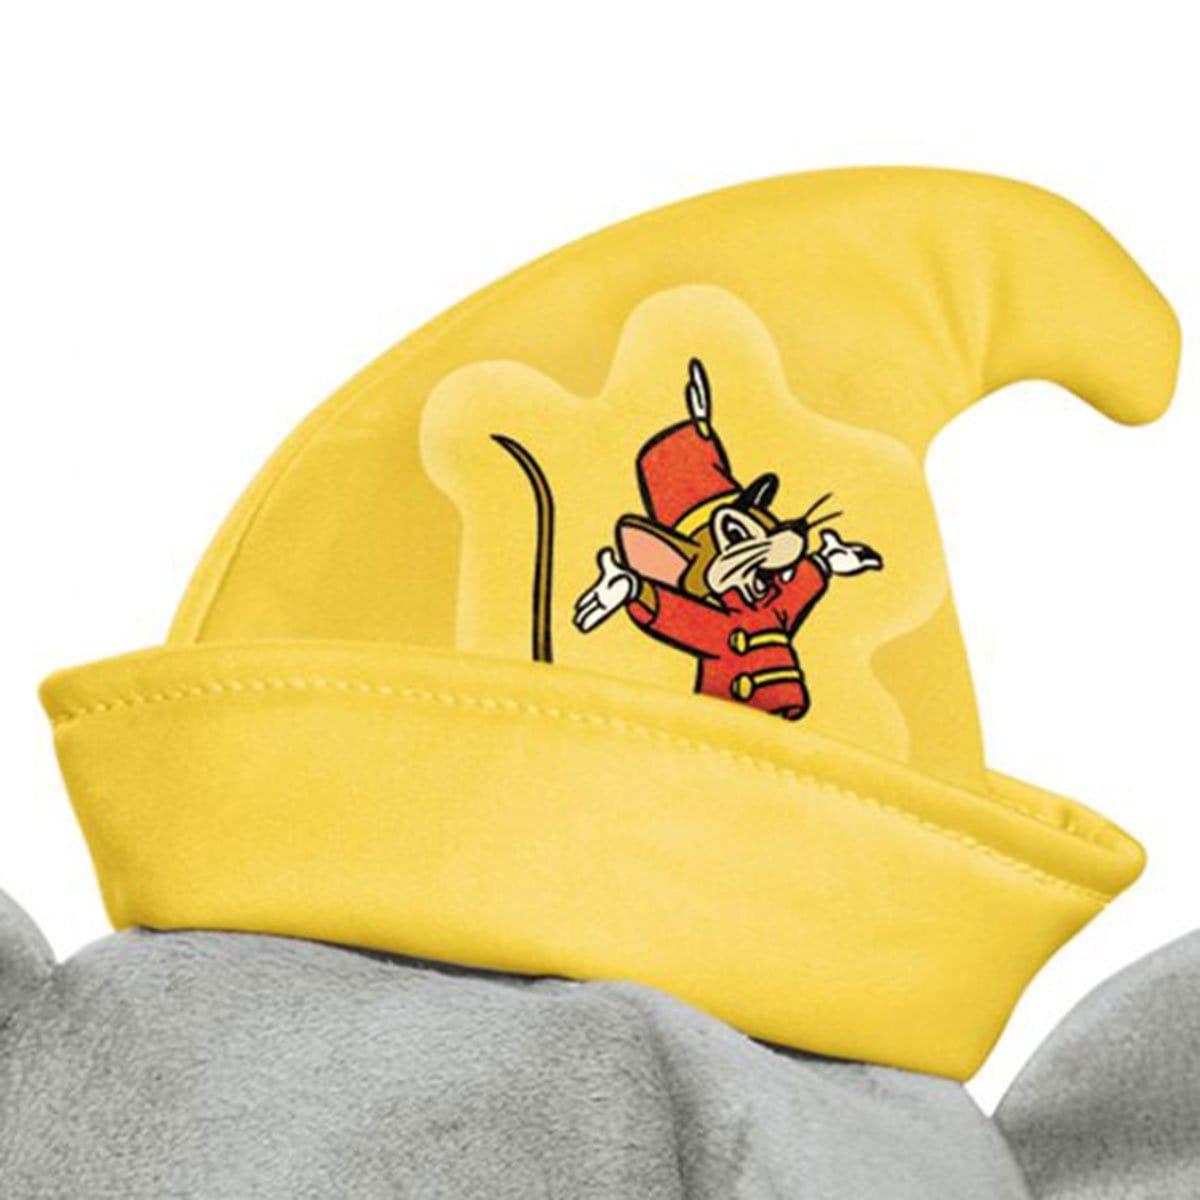 Dumbo Classic Costume for Toddler | Party Expert